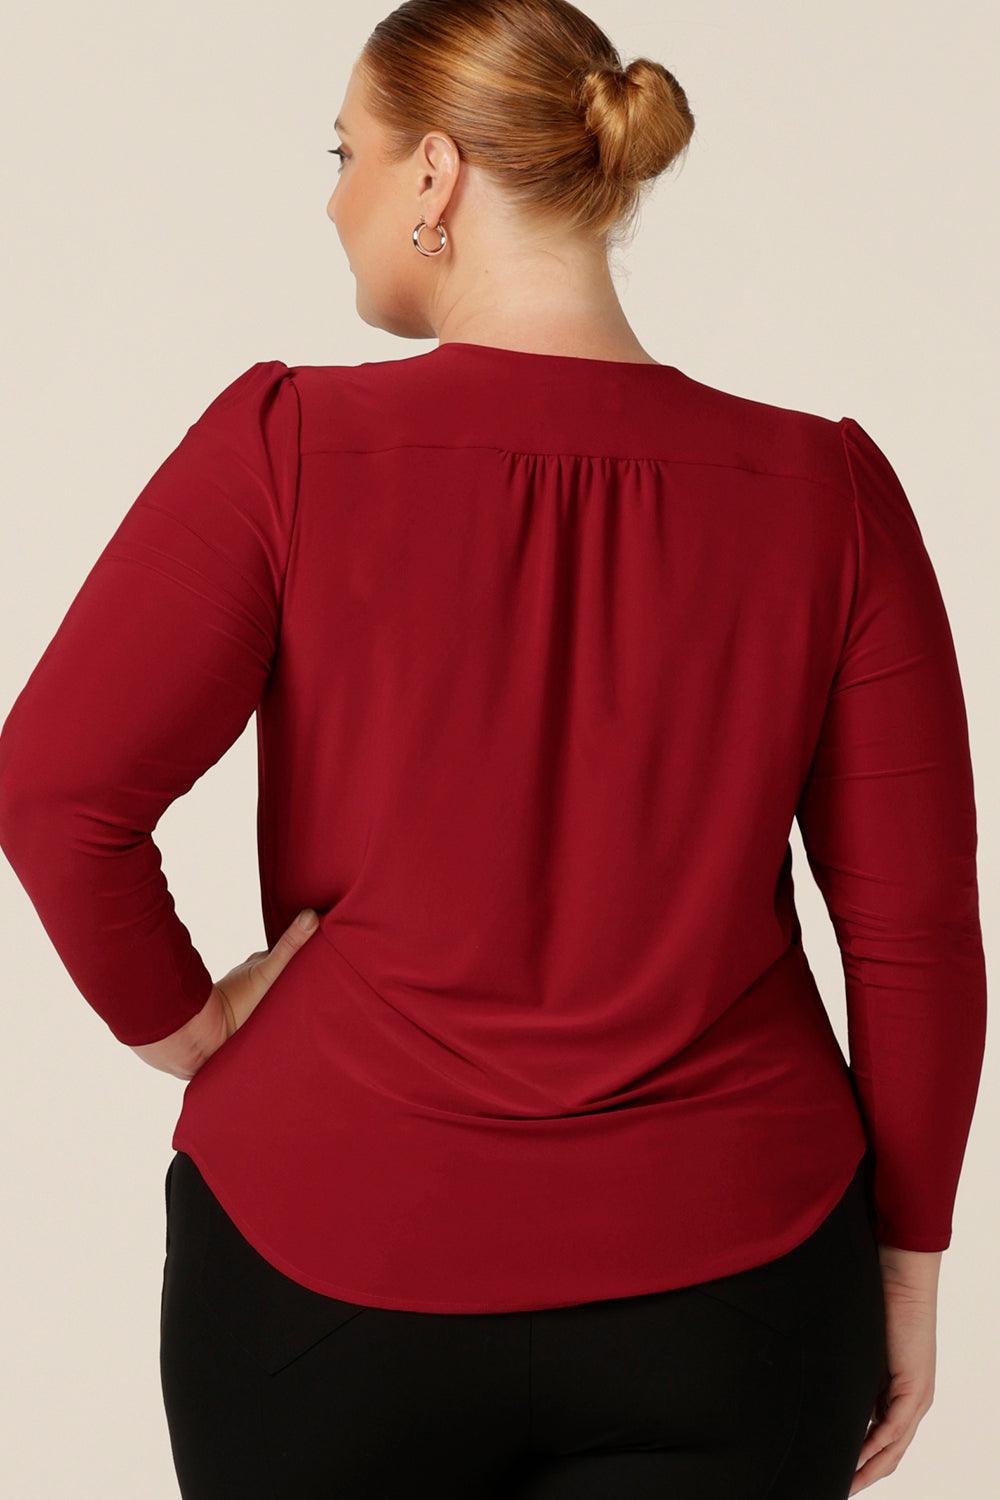 Back view of a classic long sleeve women's top in flame red jersey. The perfect top for workwear and casual style, this Australian-made top features a V neck, shirttail hemline and long sleeves. Worn by a fuller figure, size 18 woman, this jersey top comes in an inclusive size range of sizes 8-24. 